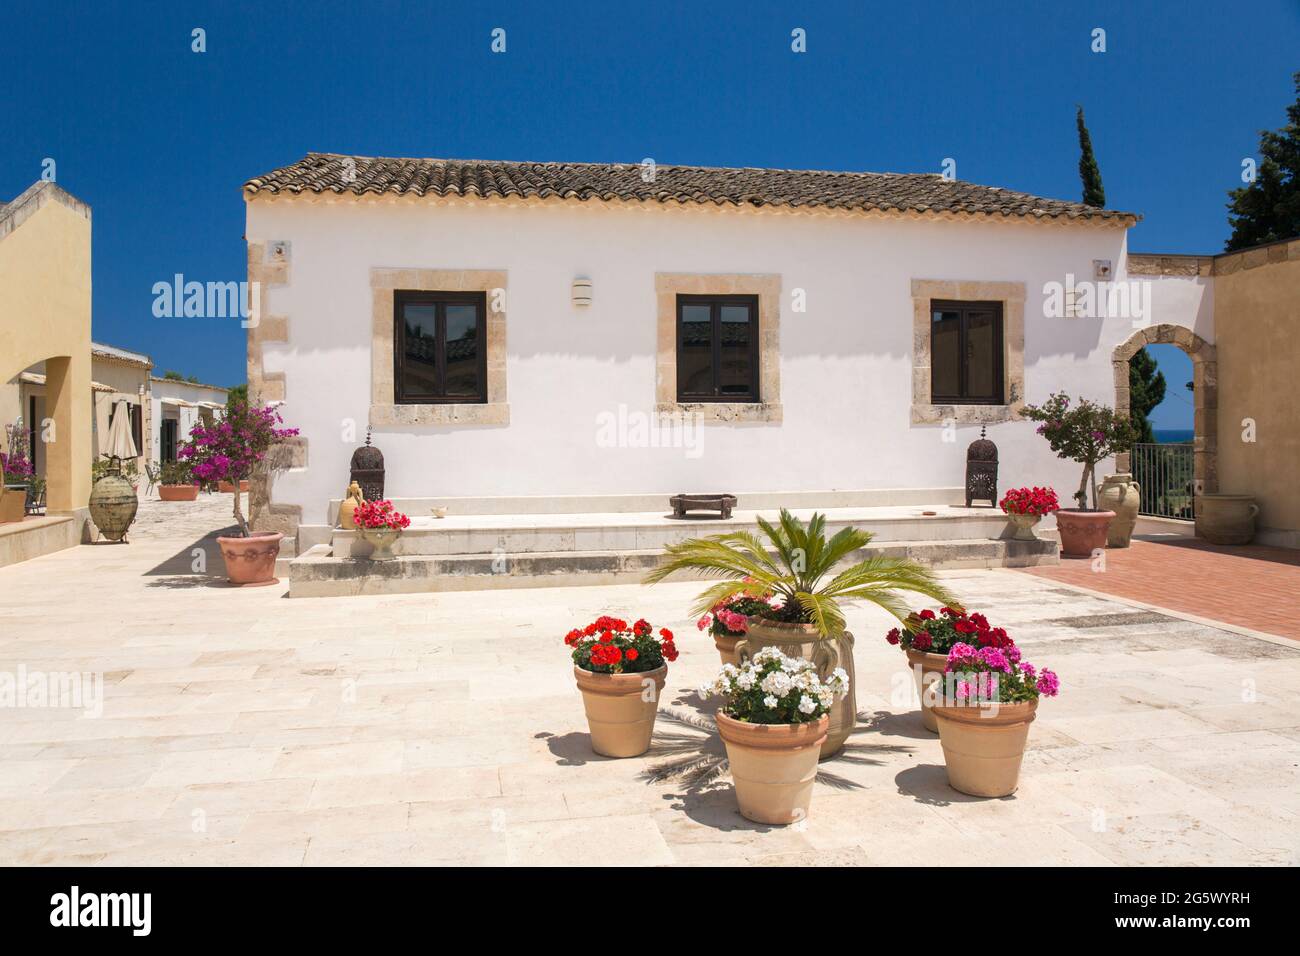 Noto, Syracuse, Sicily, Italy. View across sunlit courtyard of La Corte del Sole, a former 19th century masseria, now a boutique hotel. Stock Photo